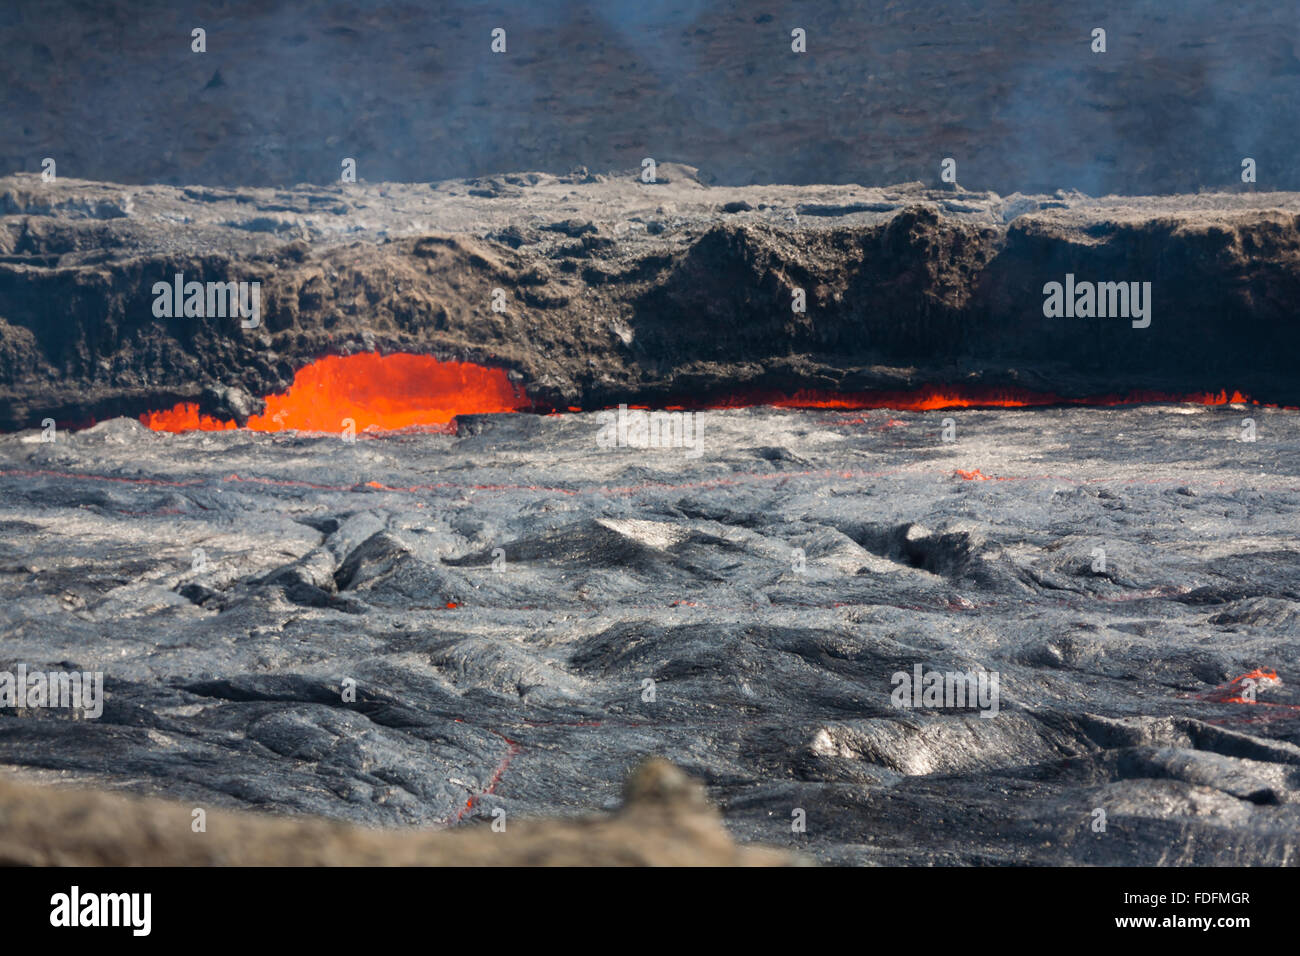 A thin crust of cooled lava moves slowly across the lava lake of Erta Ale volcano in Ethiopia. Molten rock splashes around the edges, melting a small cave. Stock Photo